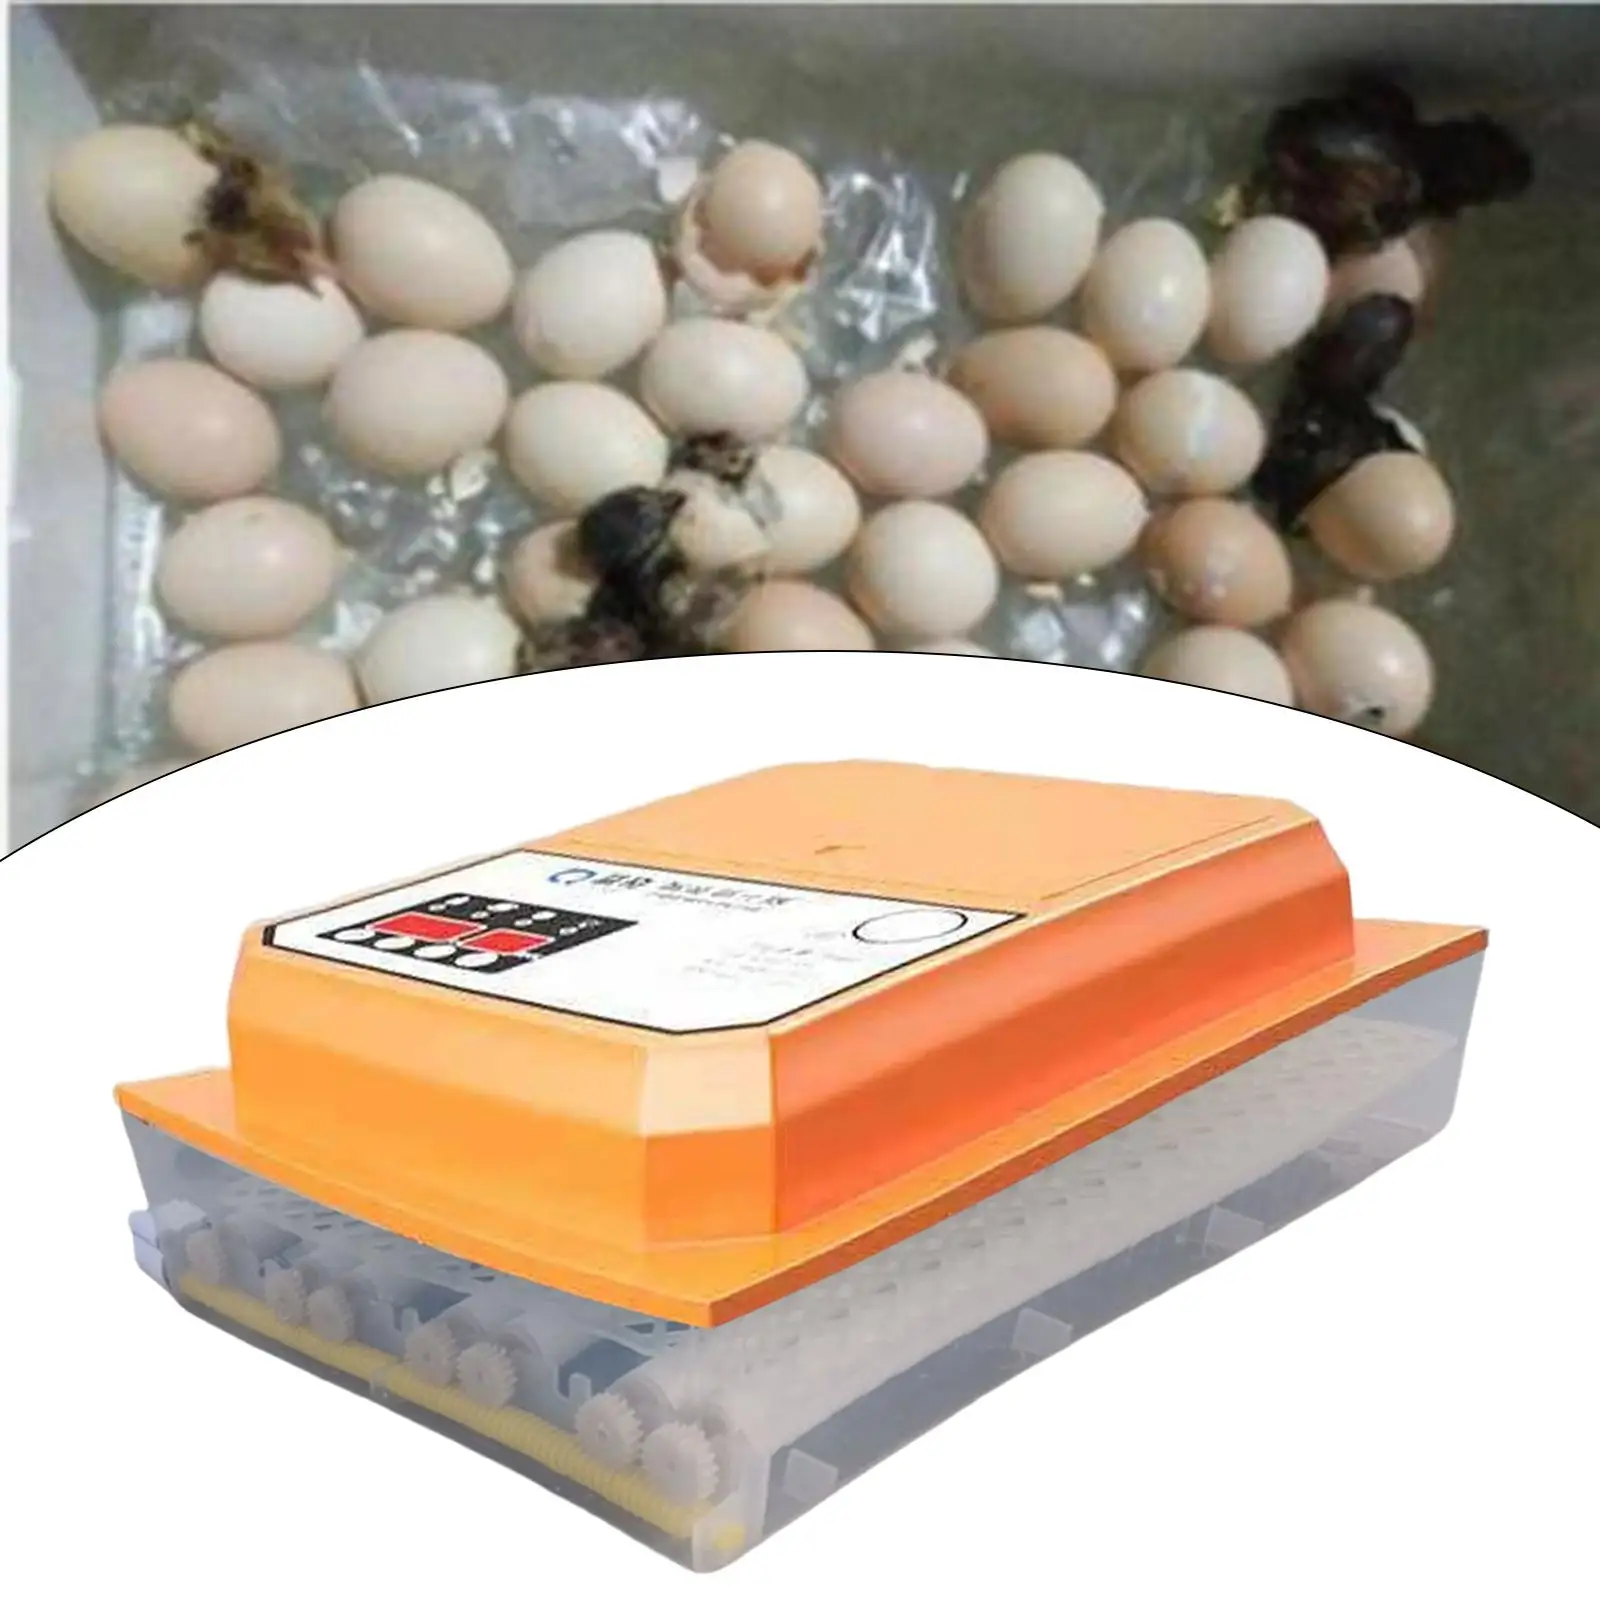 Fully Automatic Eggs Incubator Poultry Egg Turning Hatching Machine Brooder Device for Chicken Geese Quail